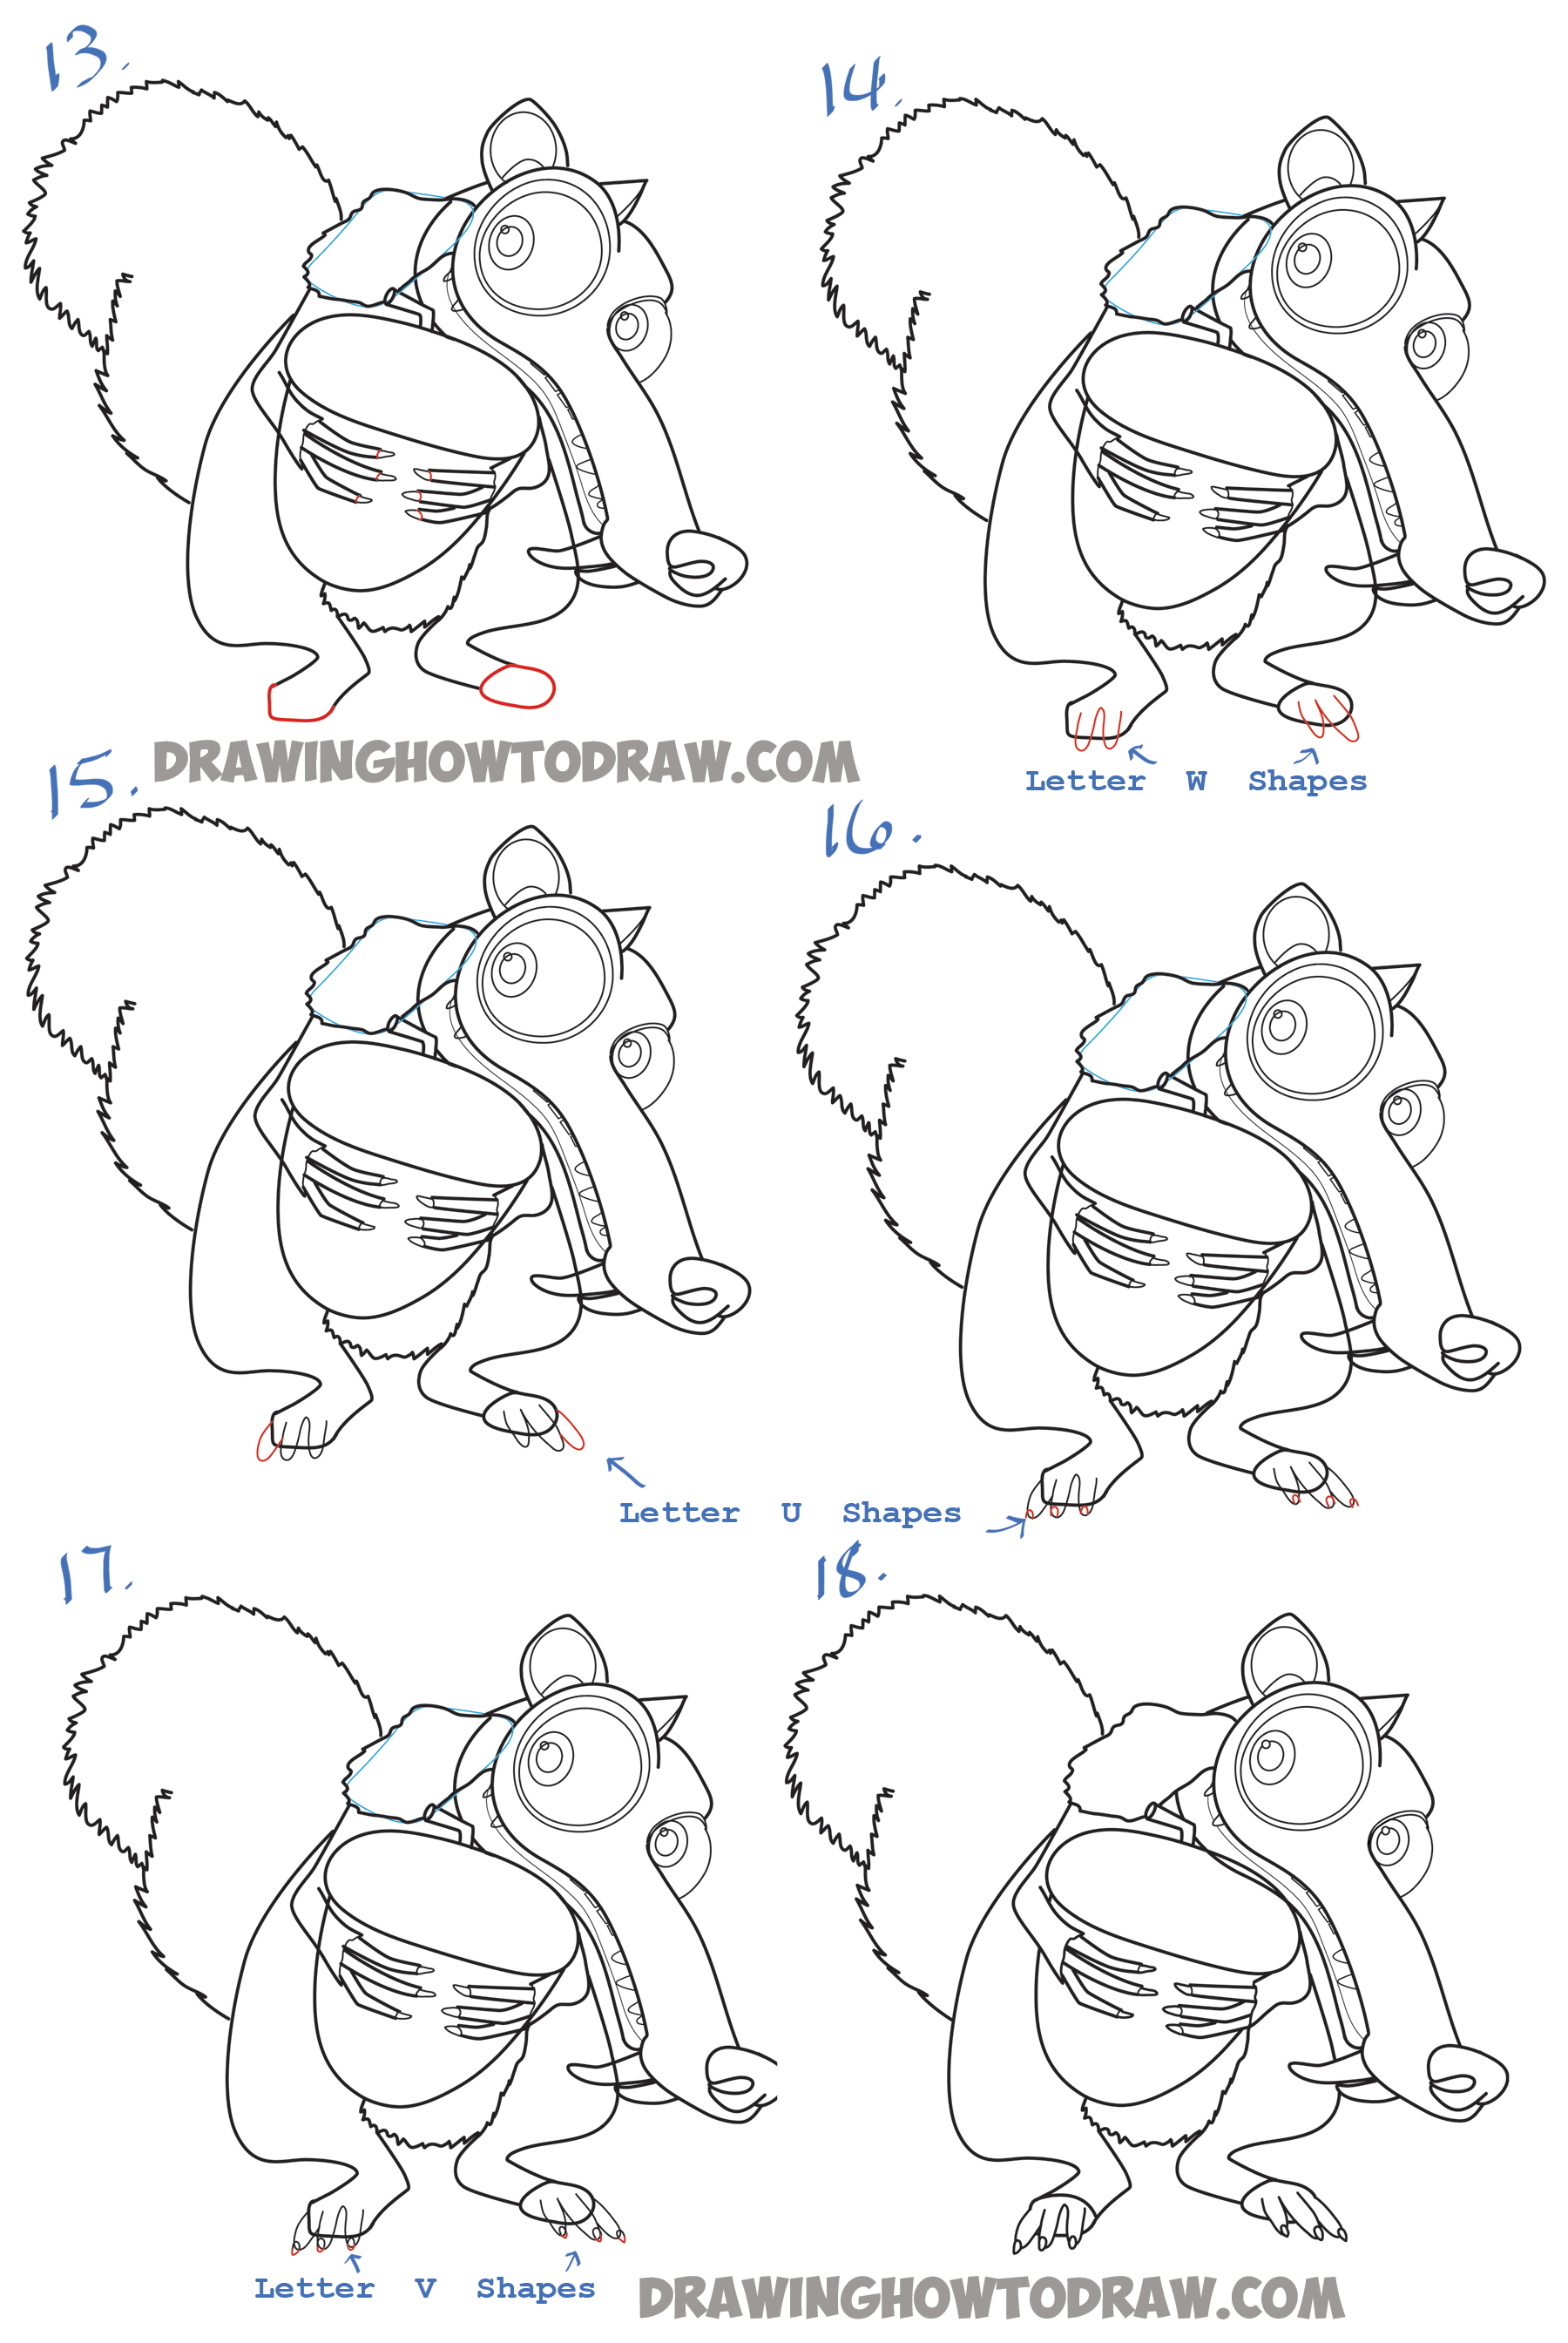 Learn How to Draw Scrat the Squirrel from Ice Age - Easy Steps Drawing Lesson